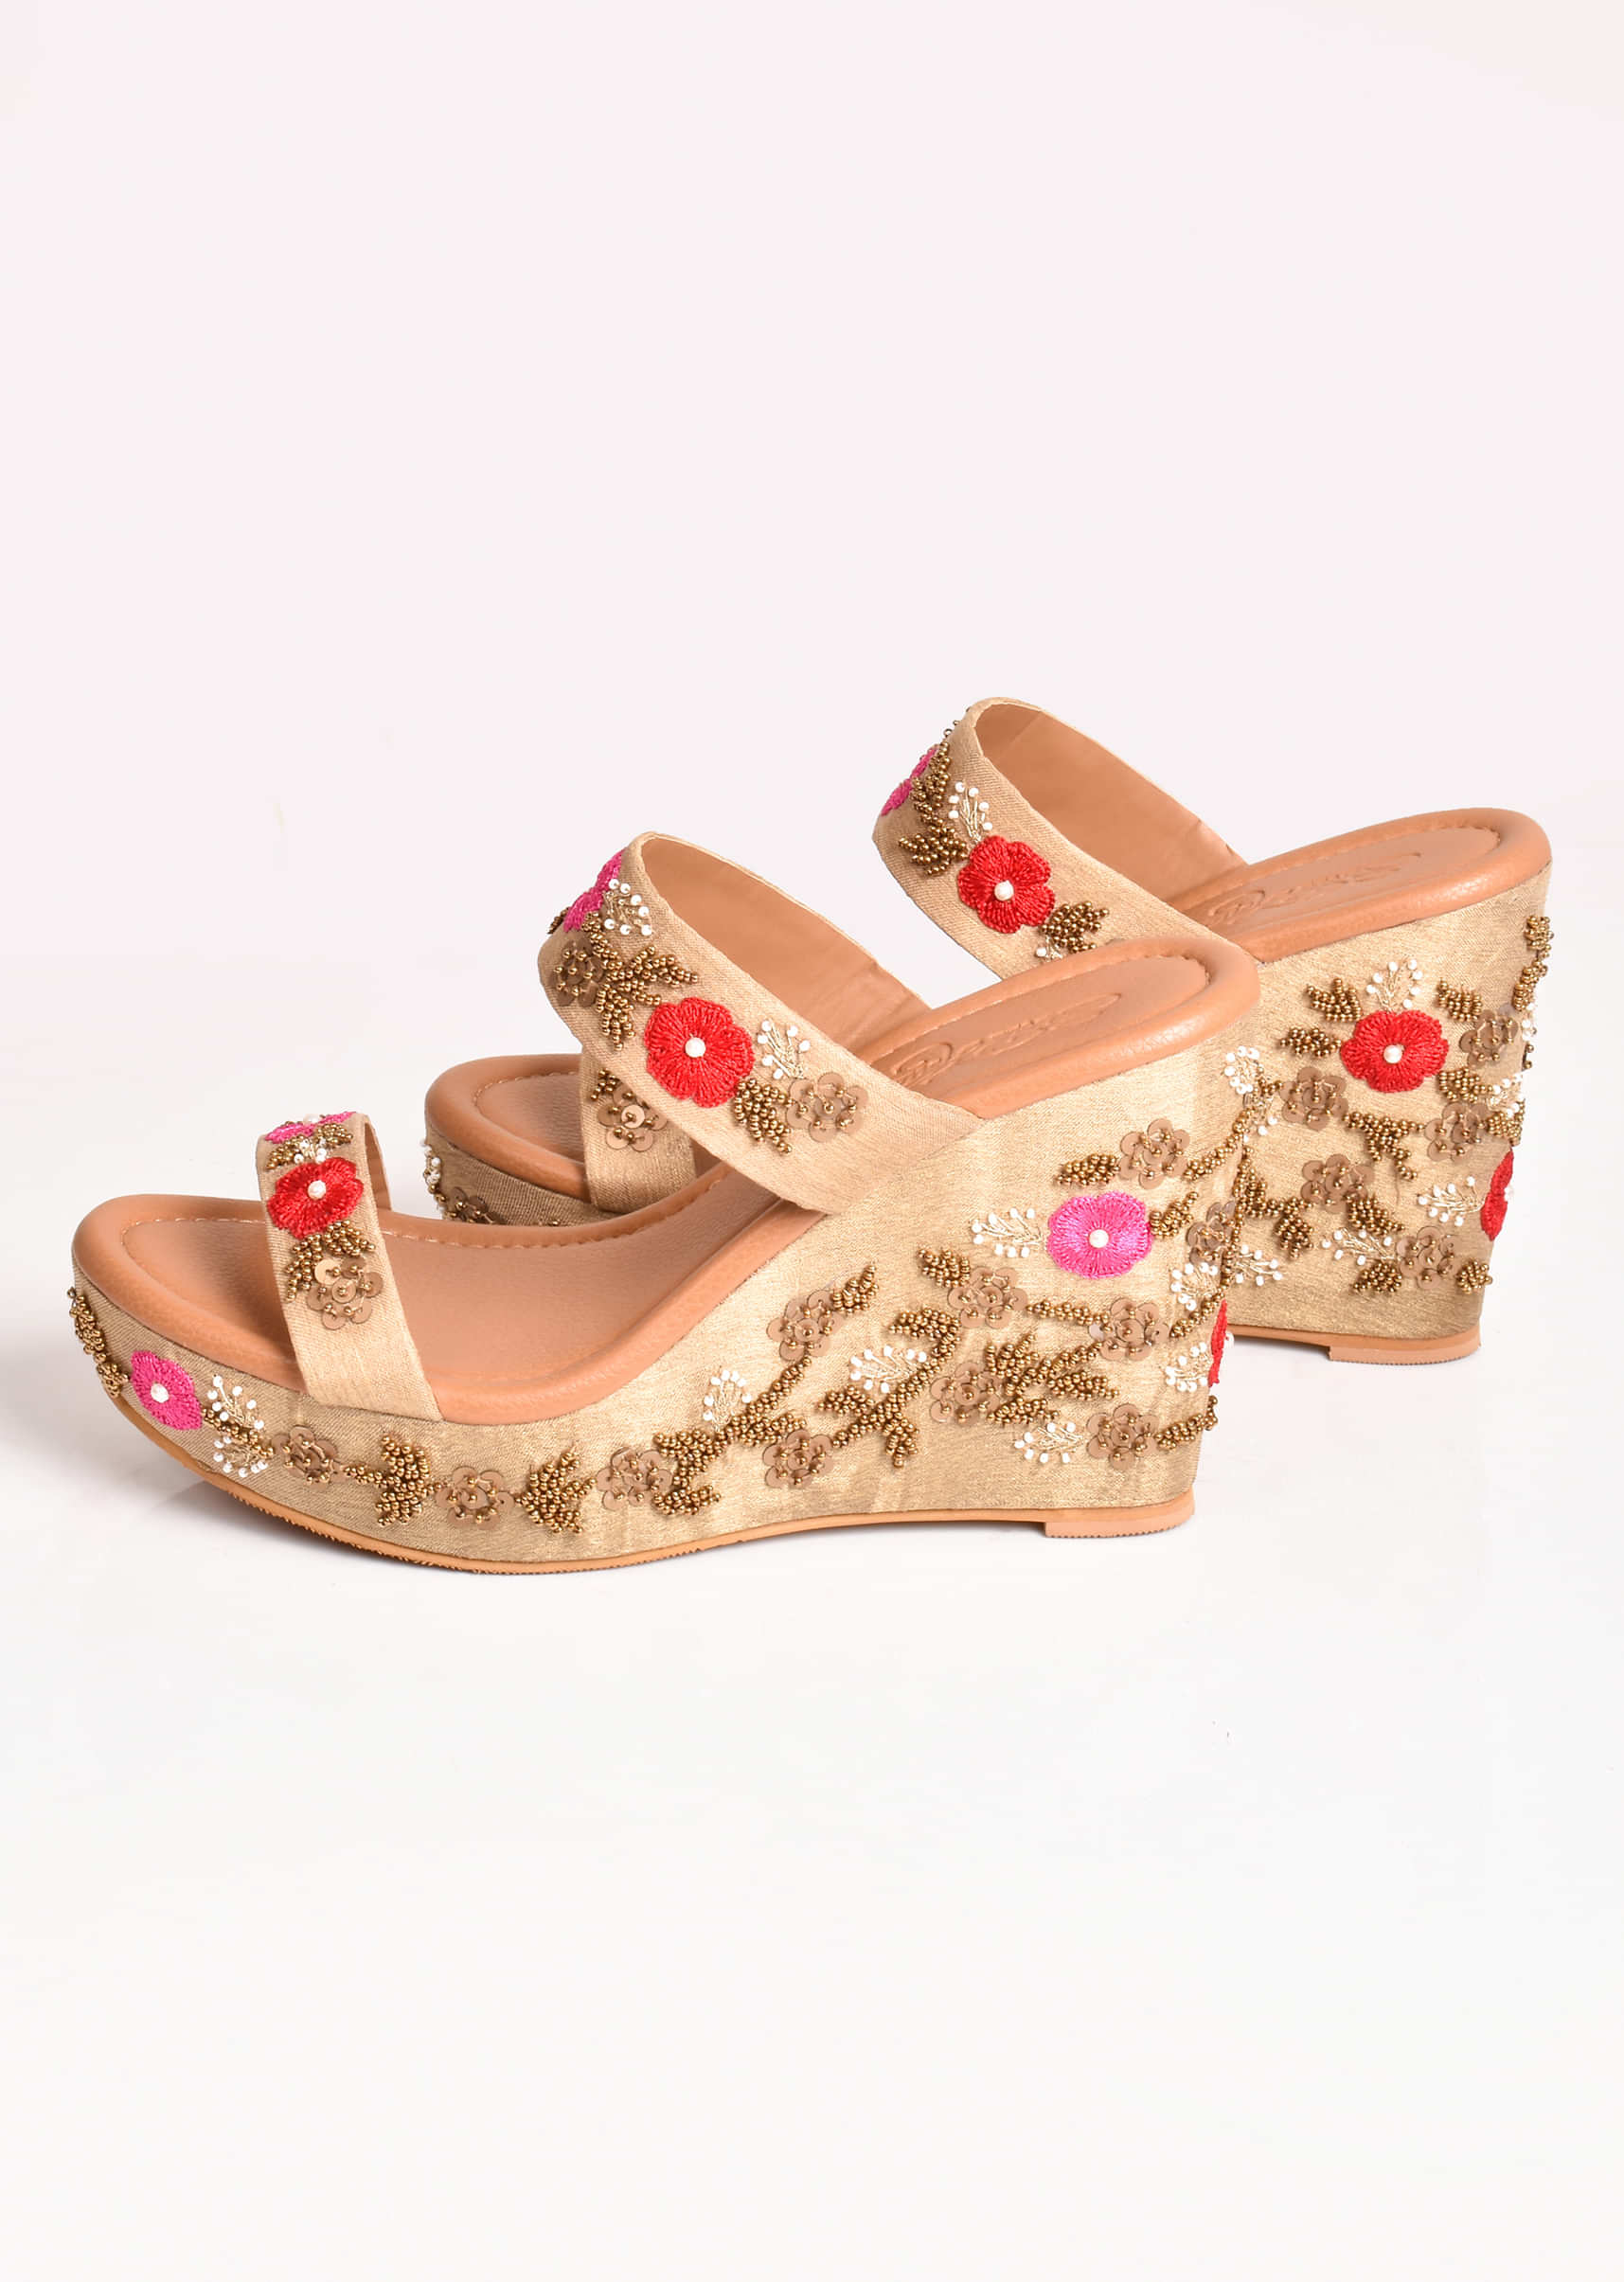 Nude Wedges In Silk With Red And Pink Resham Flowers Along With Gold Sequins Work By Sole House